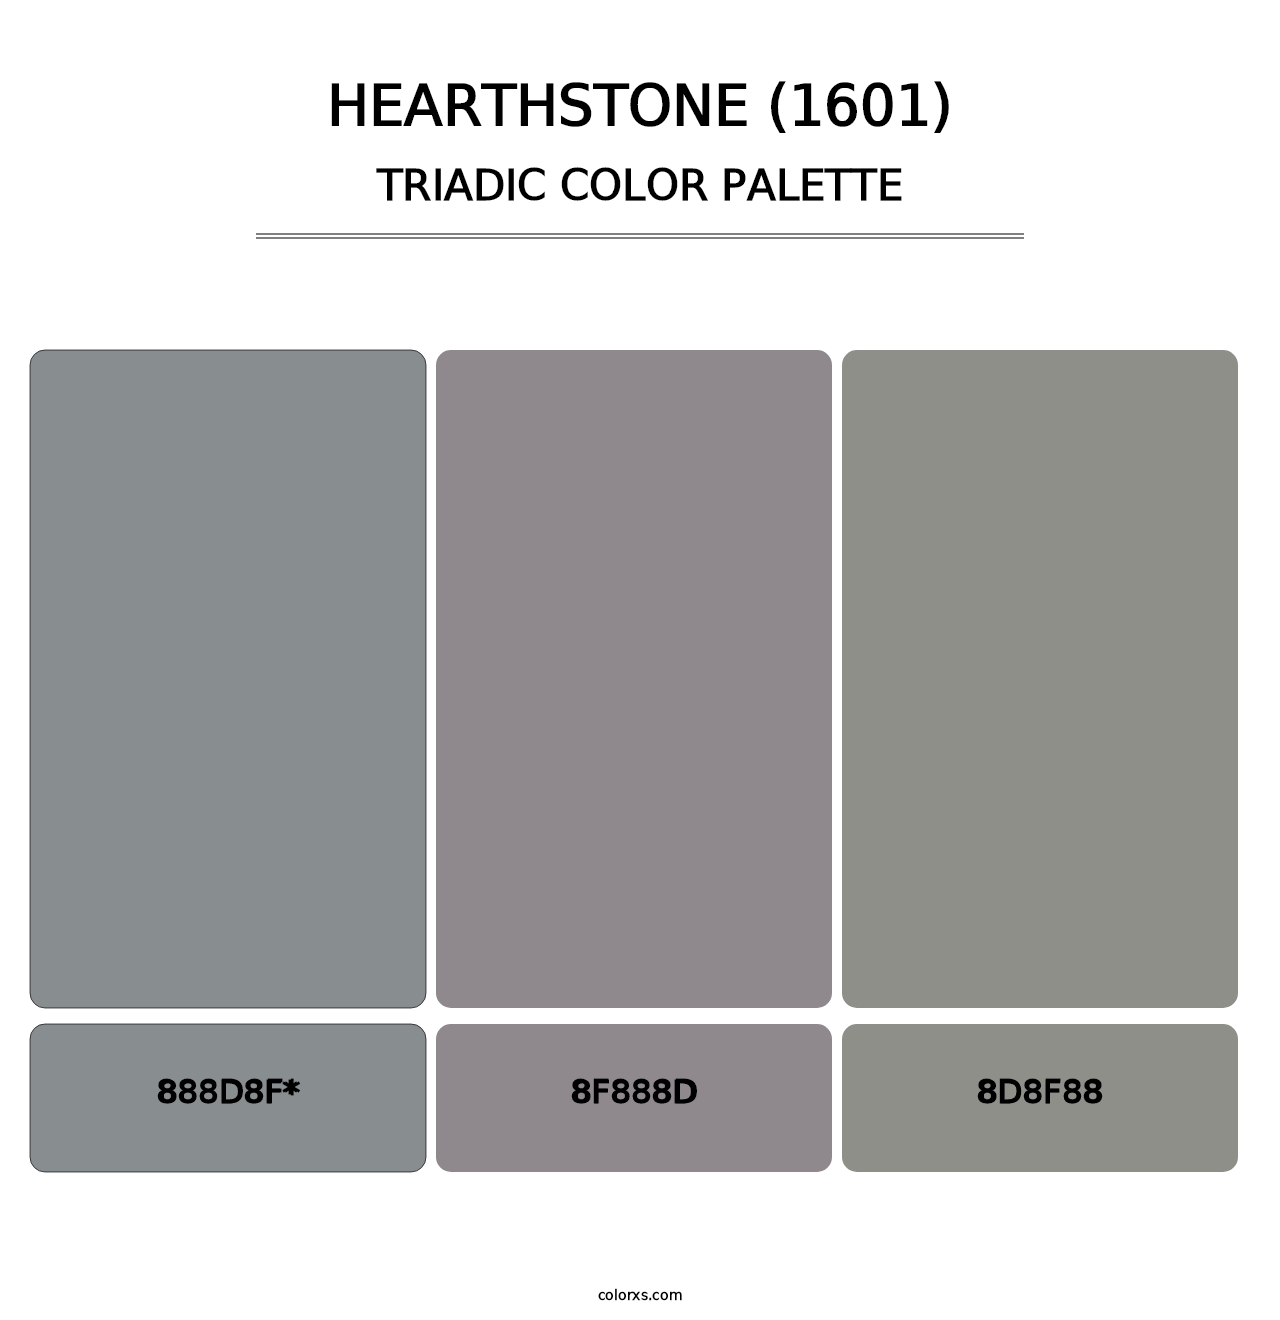 Hearthstone (1601) - Triadic Color Palette